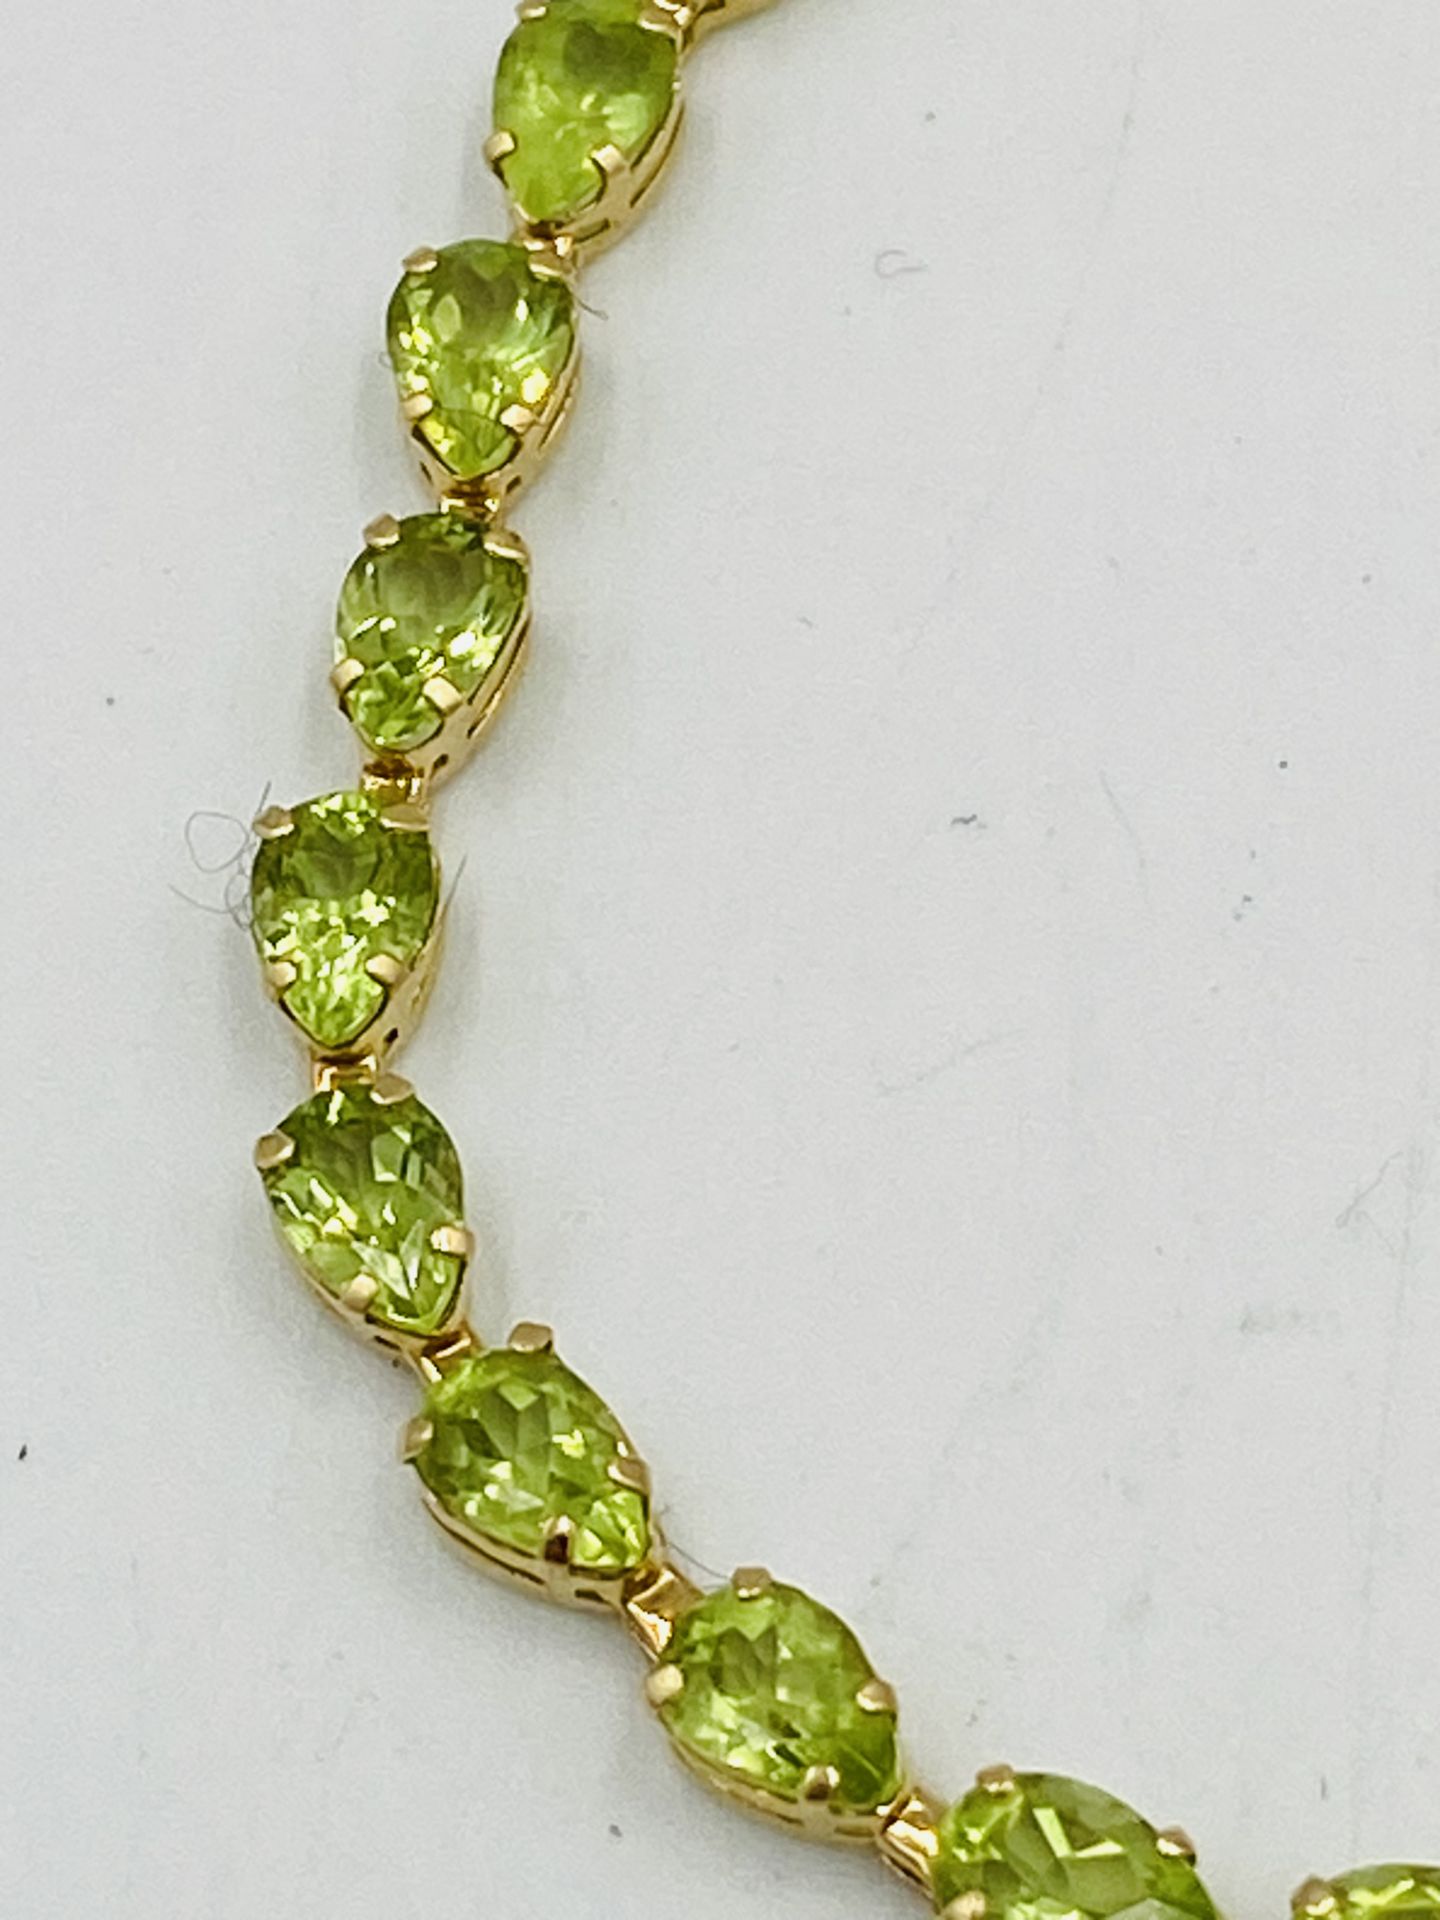 14ct gold bracelet set with green stones - Image 4 of 5